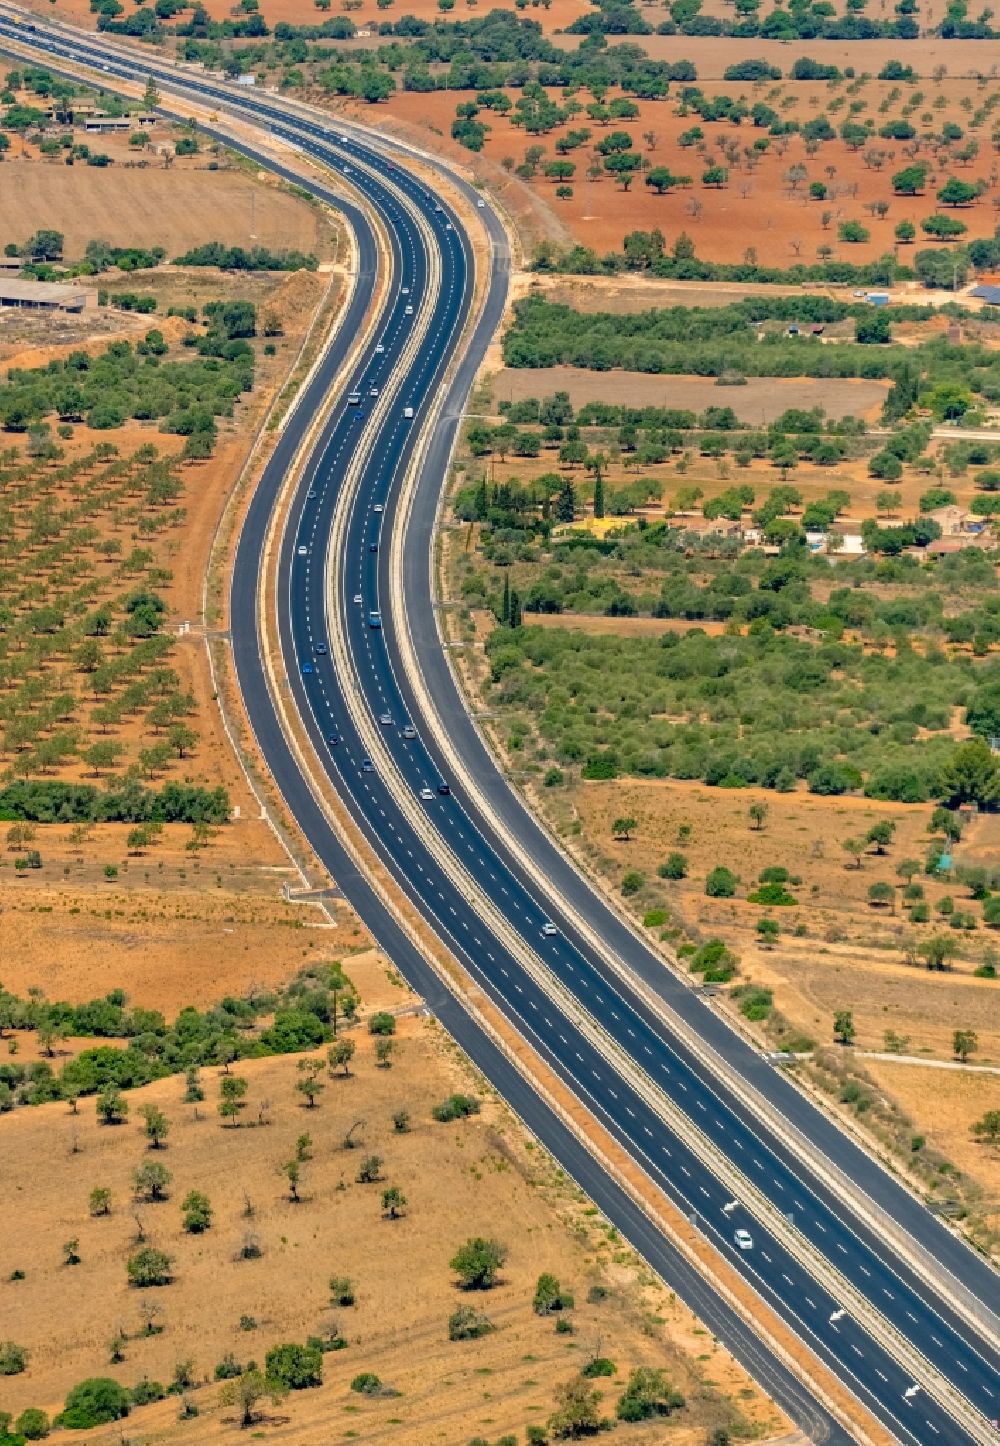 Campos from the bird's eye view: Highway route Ma-19 in in Campos in Islas Baleares, Spain